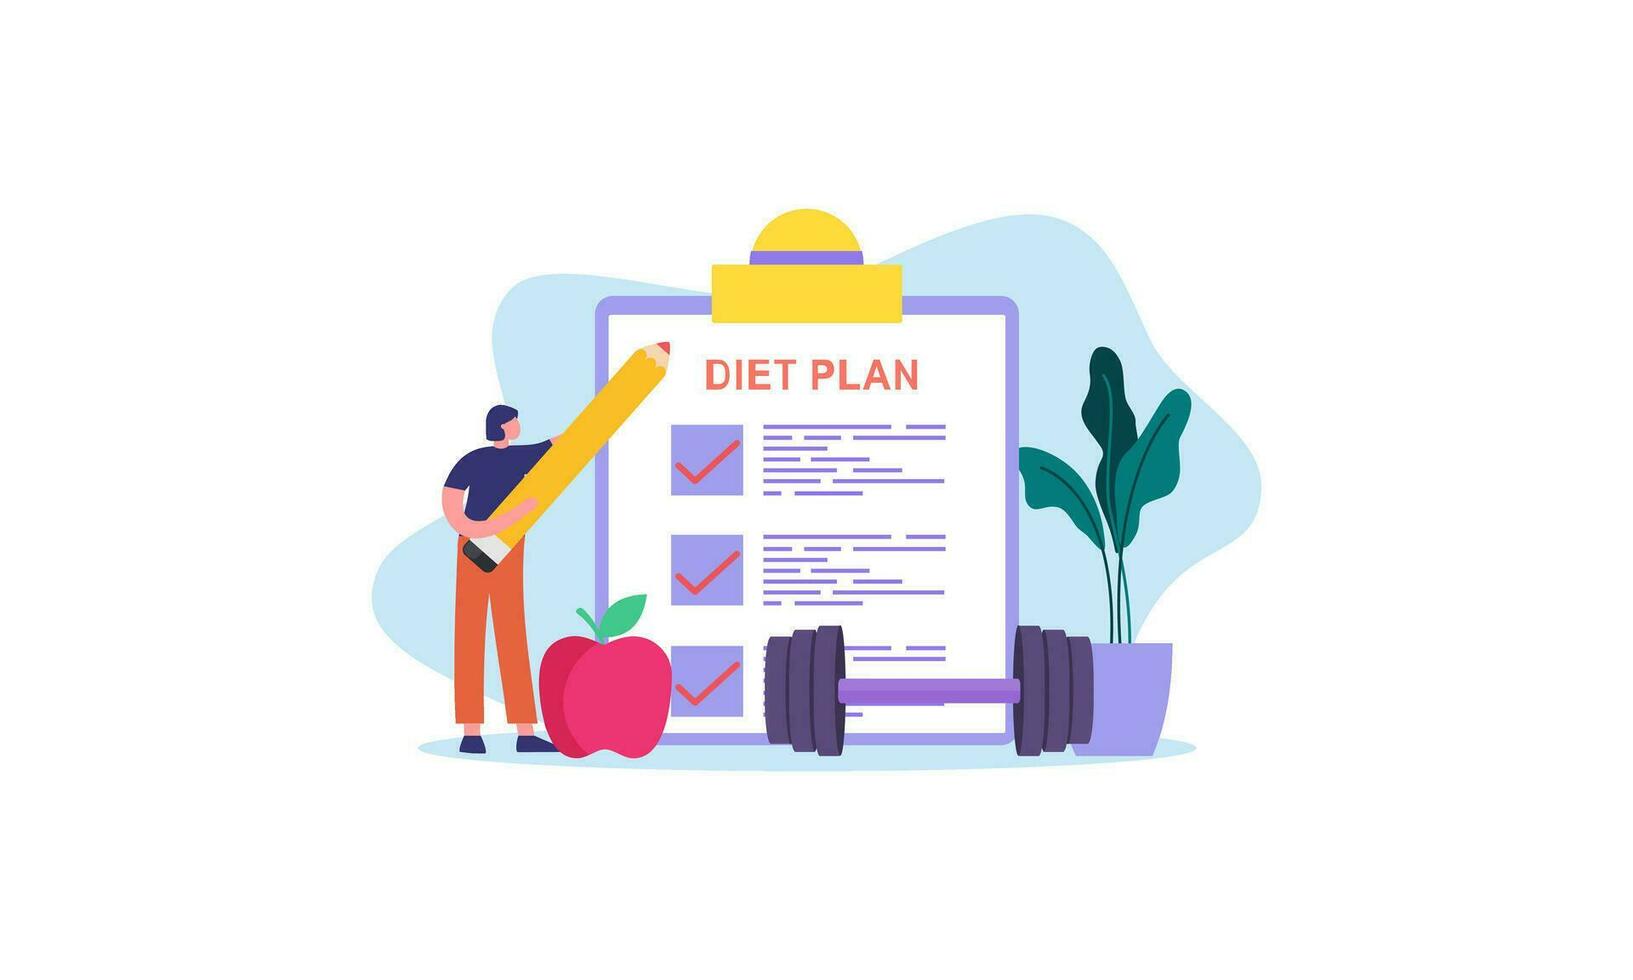 Diet plan checklist illustration. People doing exercise, training and planning diet with fruit and vegetable. vector